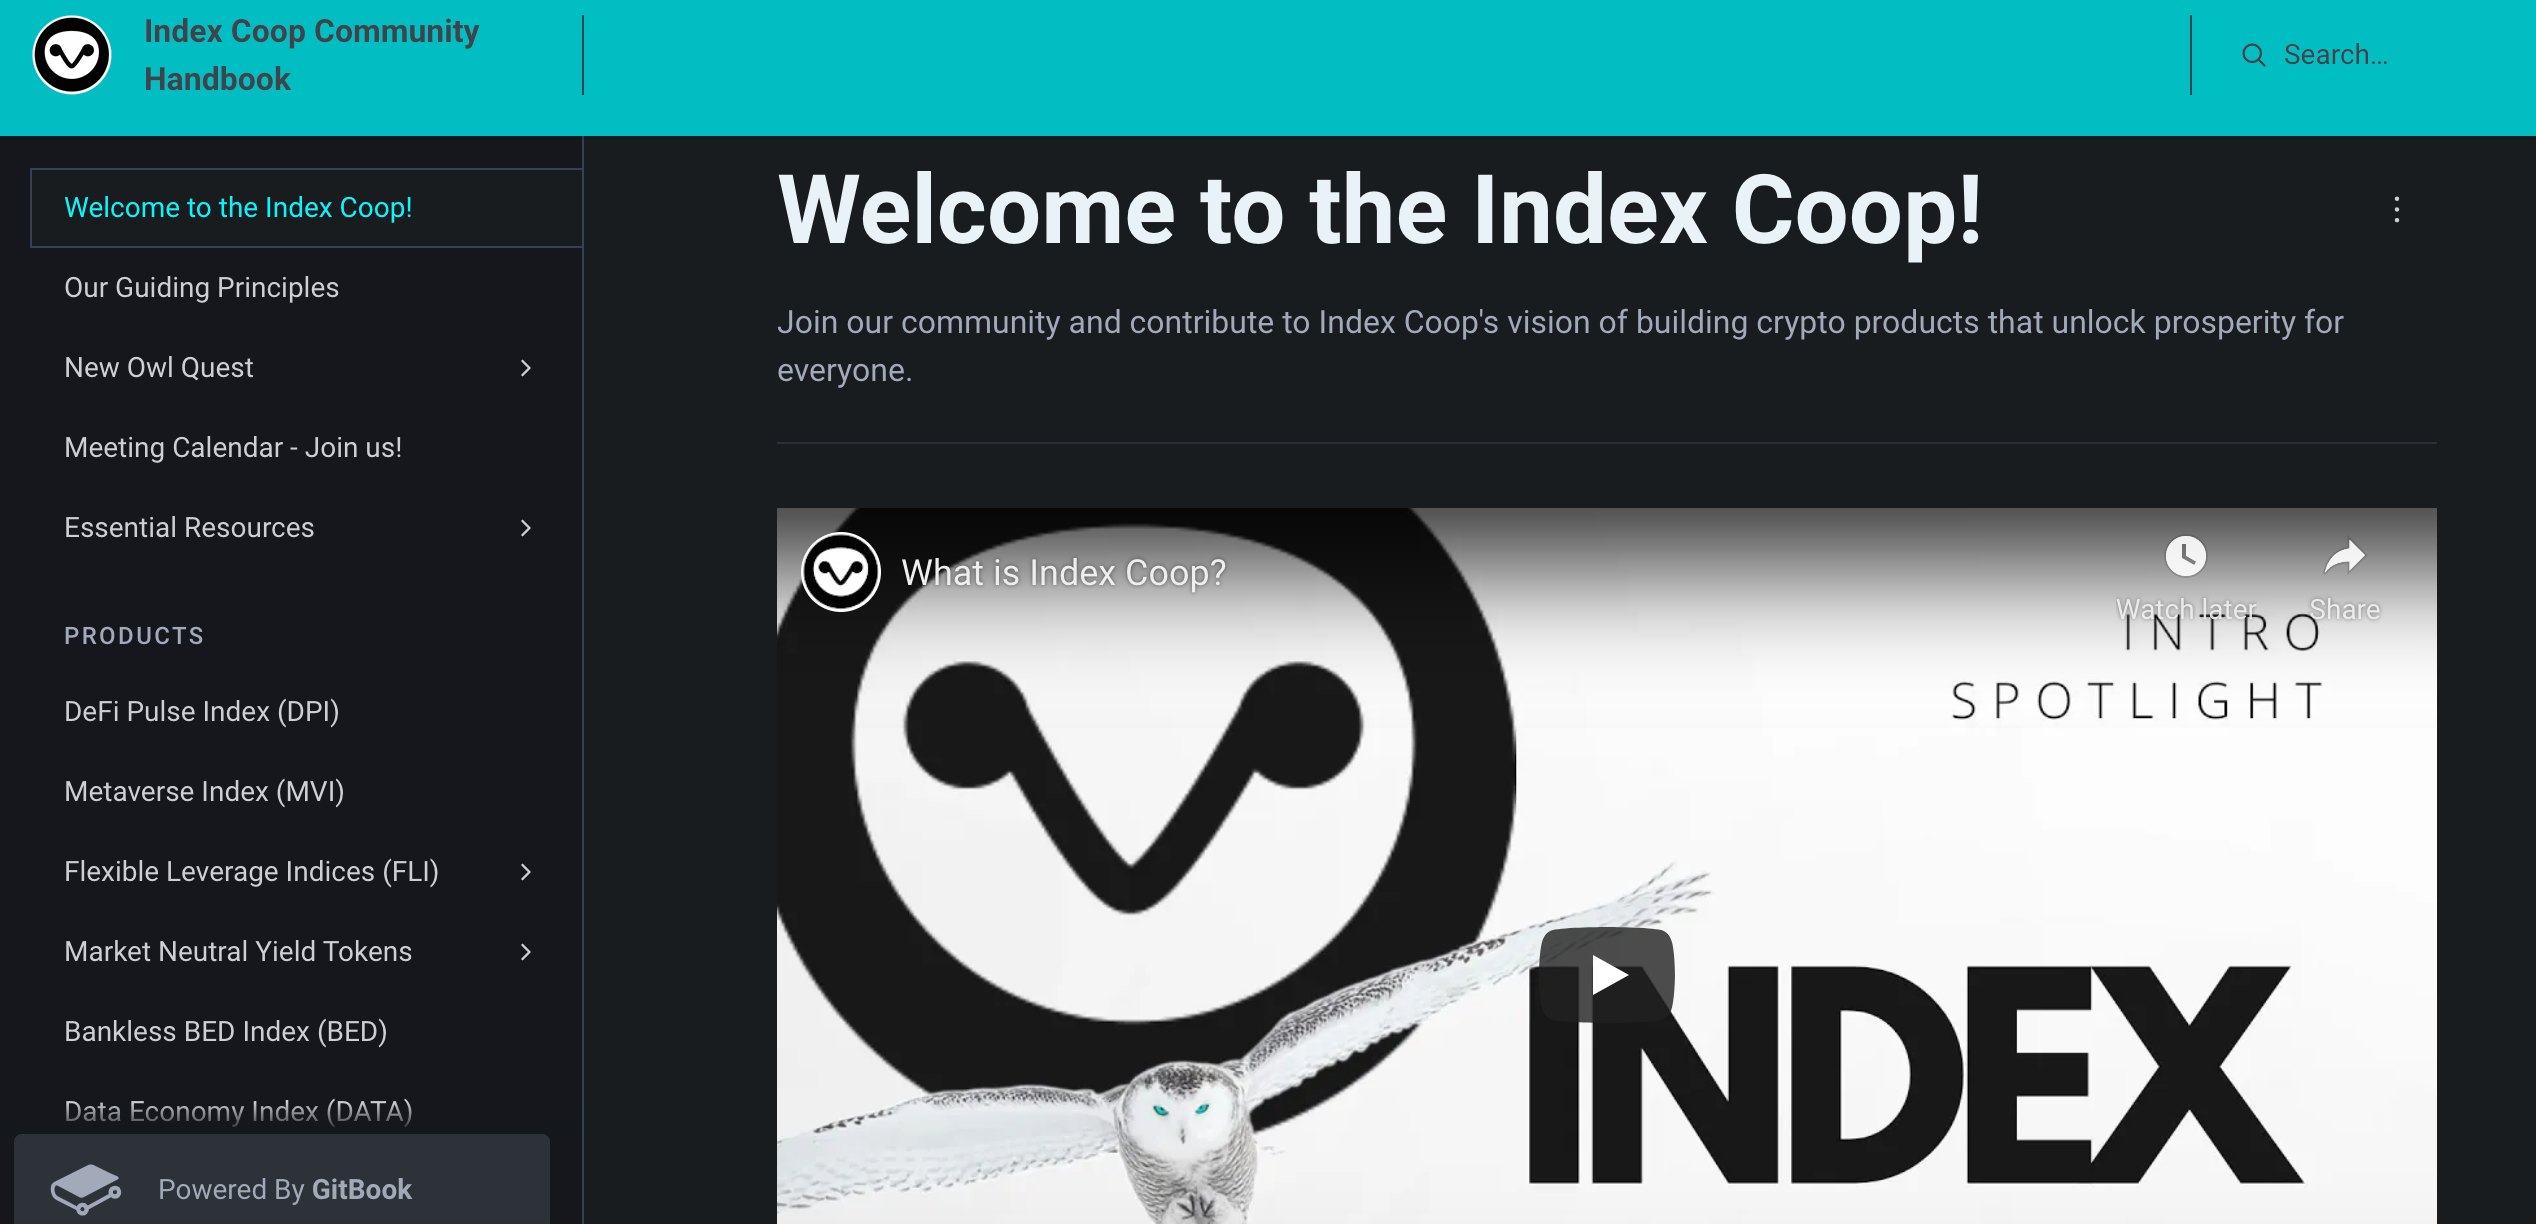 Index Coop’s public community handbook is among the most well-documented and transparent projects for their existing and prospective community members. (via: https://docs.indexcoop.com/) 